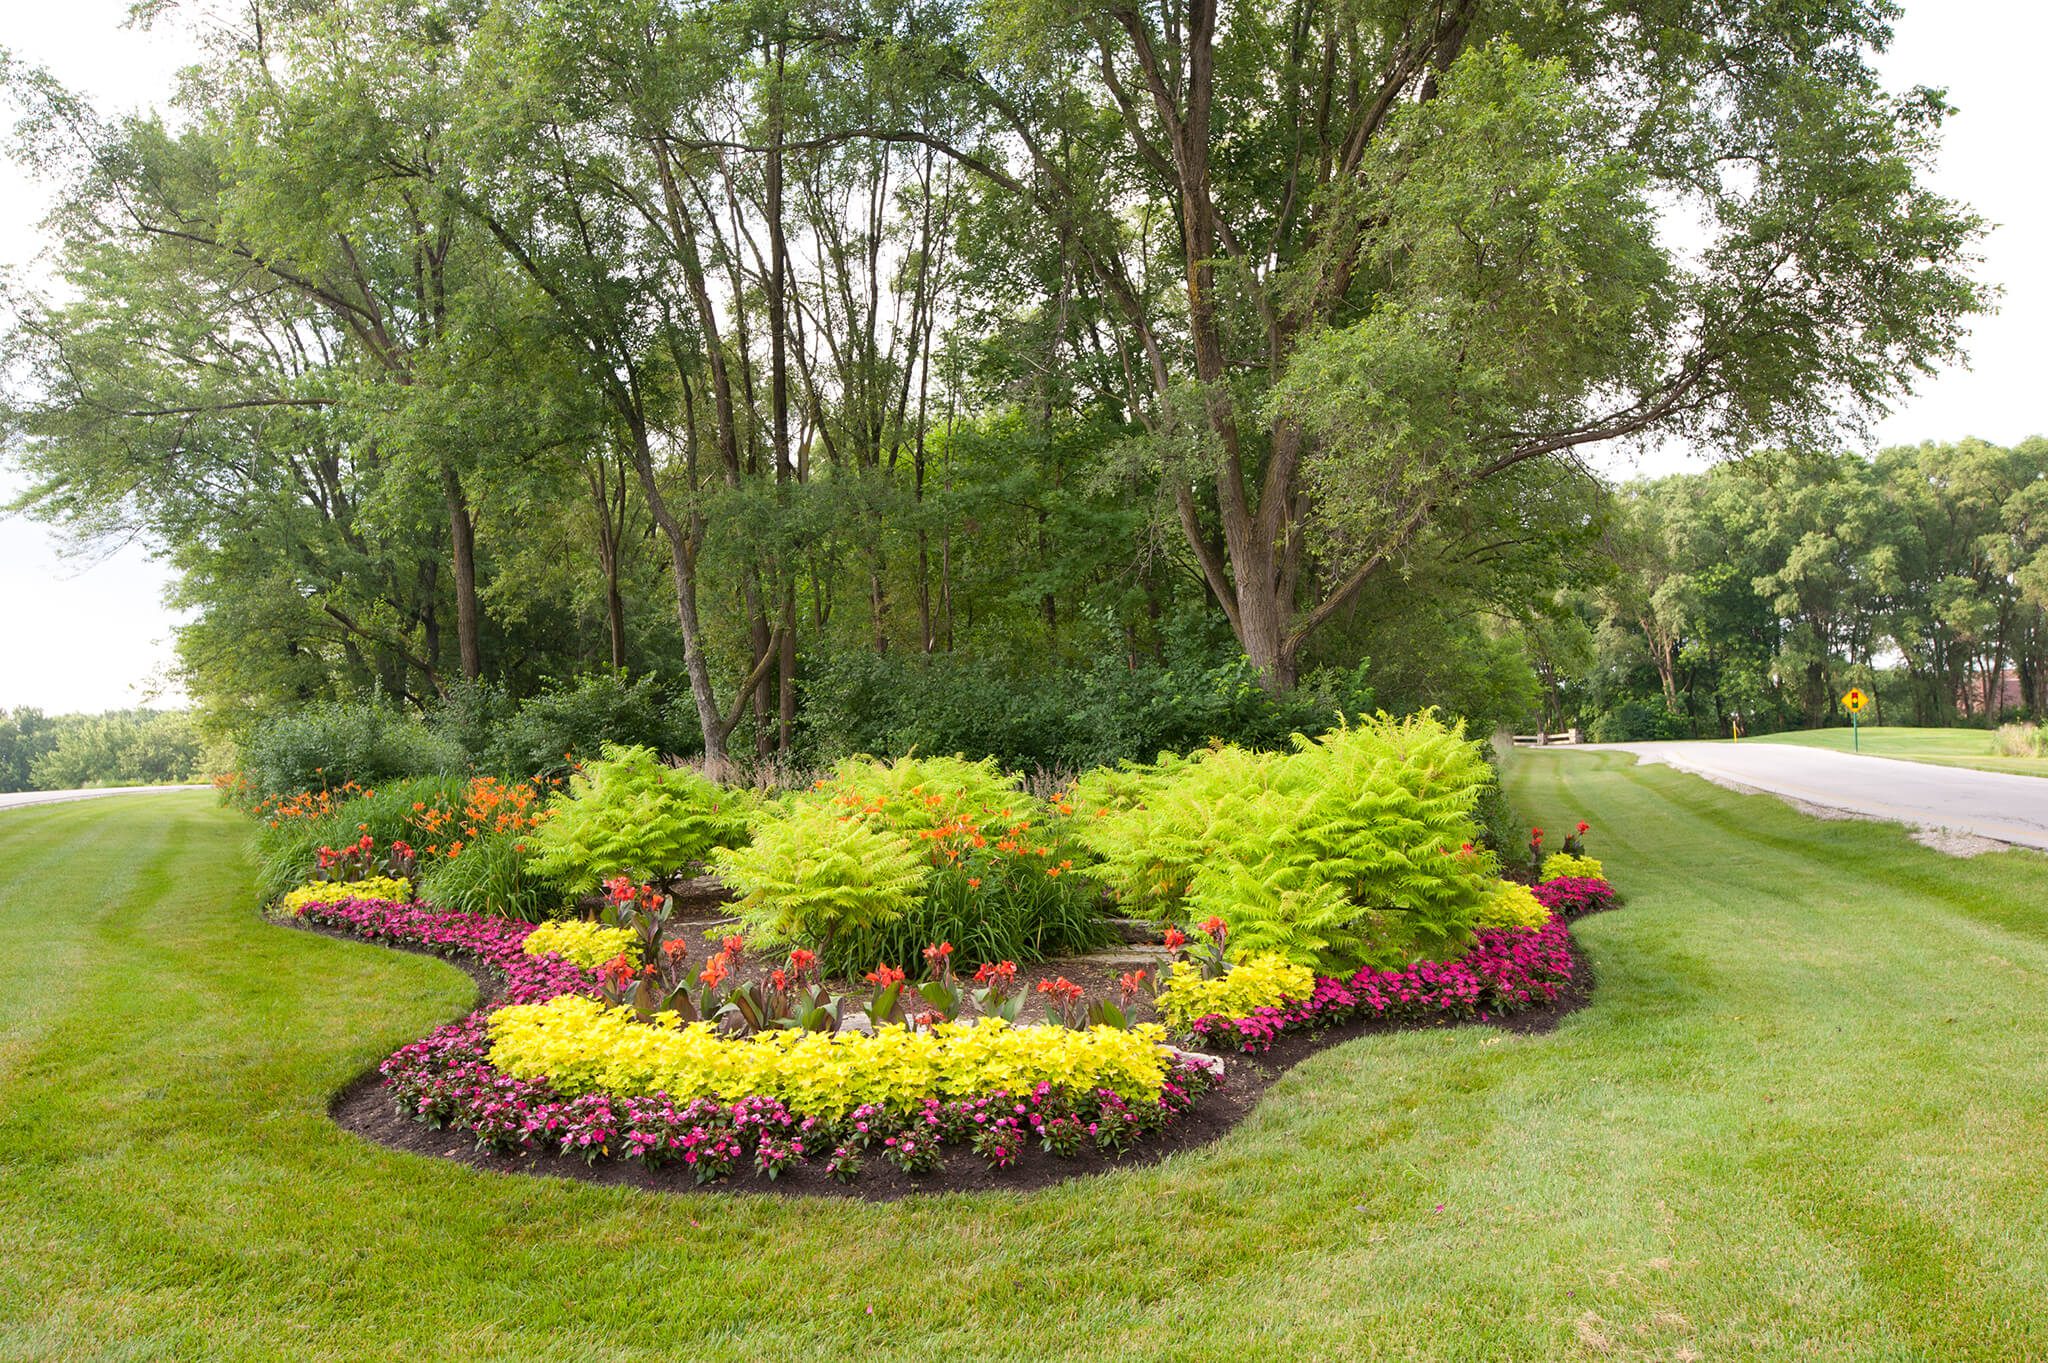 Commercial Landscaping Services For St. Charles, IL